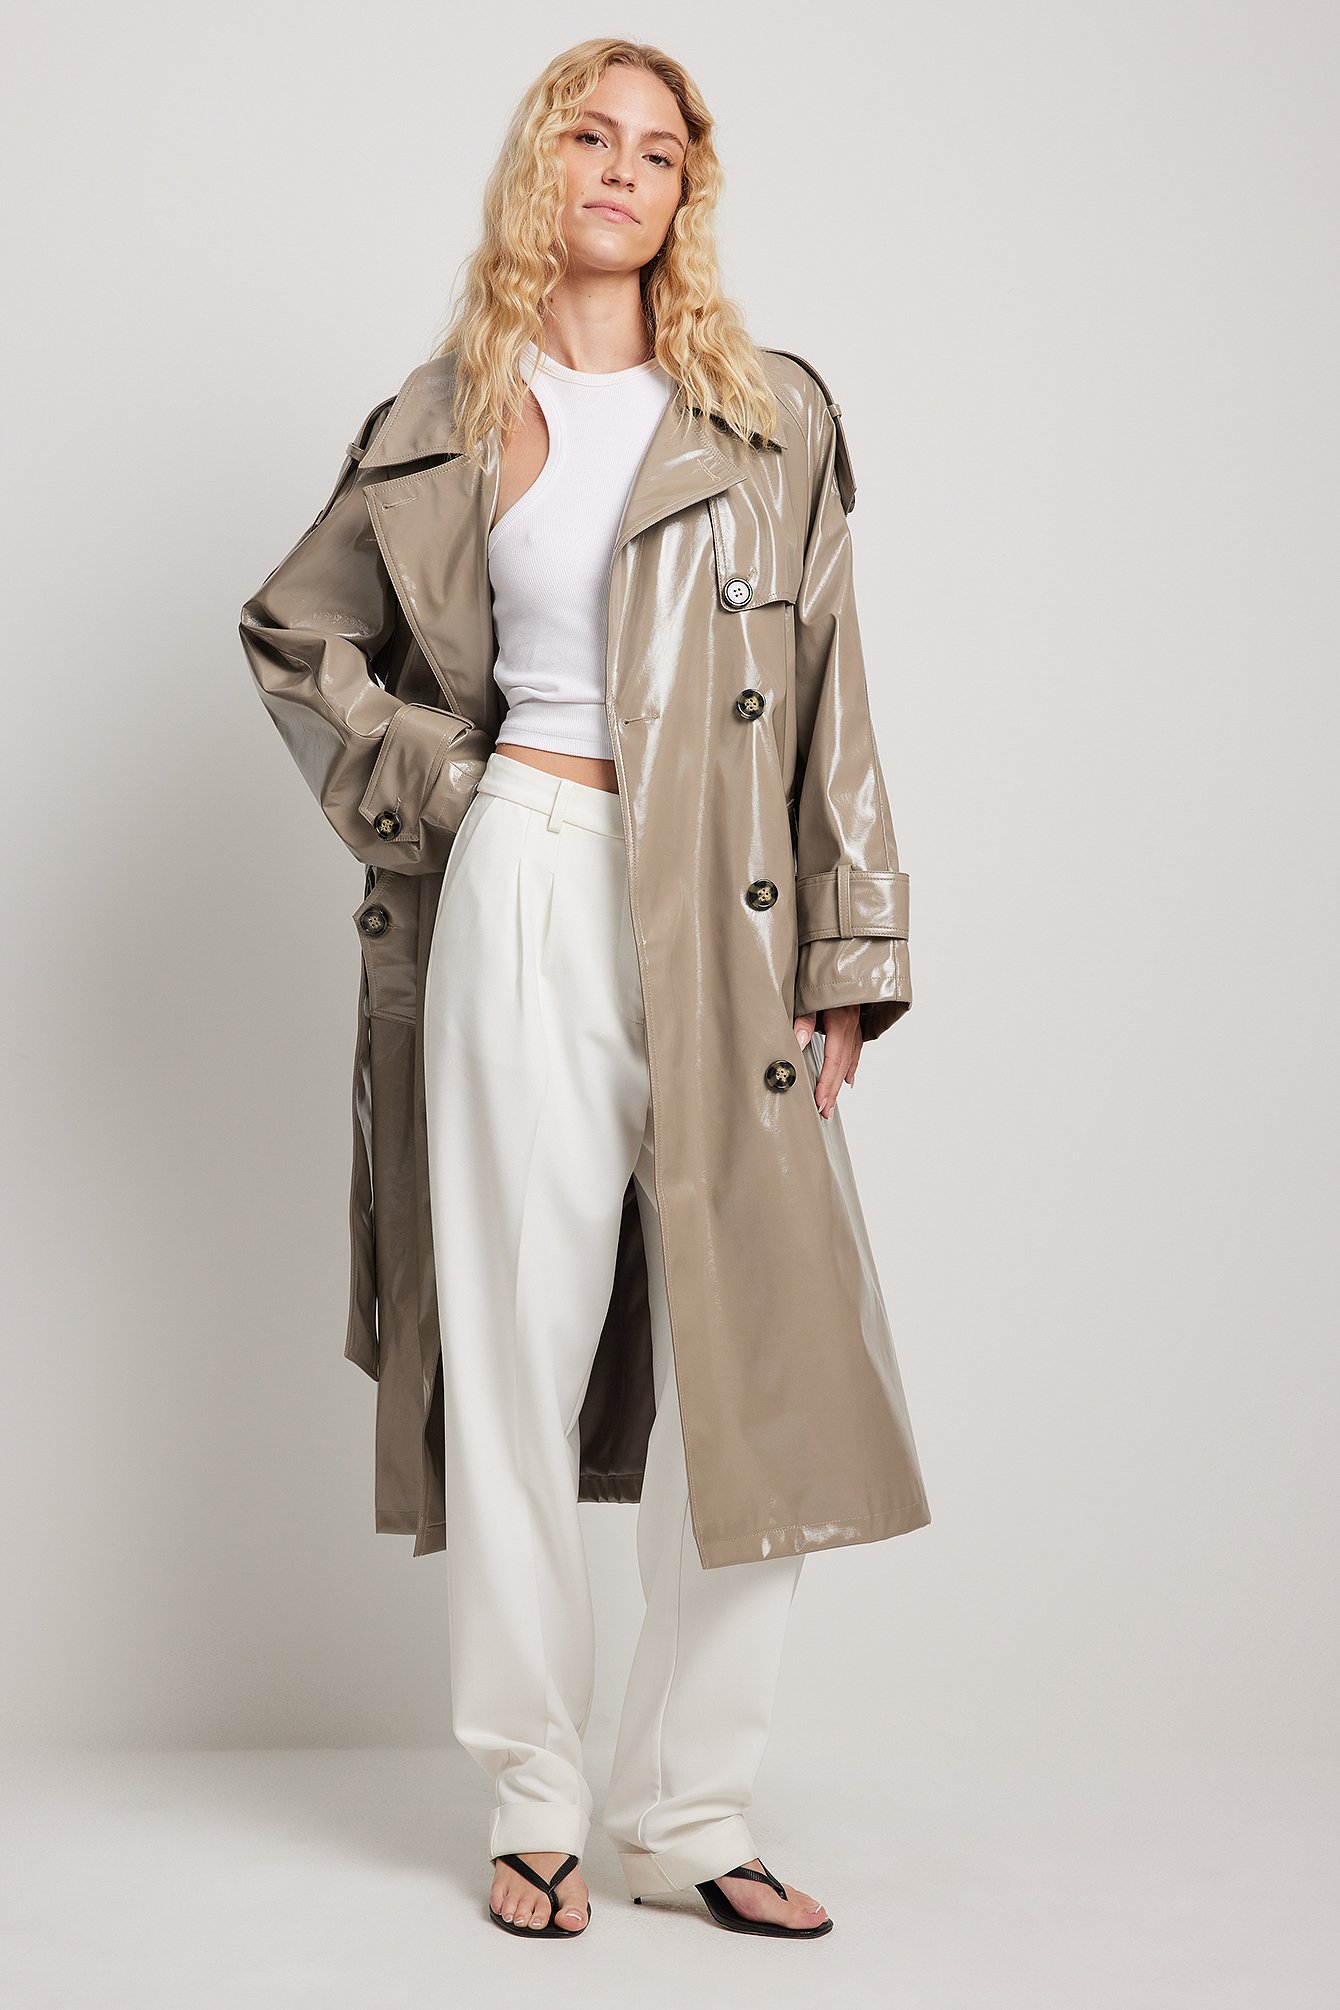 Shiny PU Belted Trench Coat Outfit